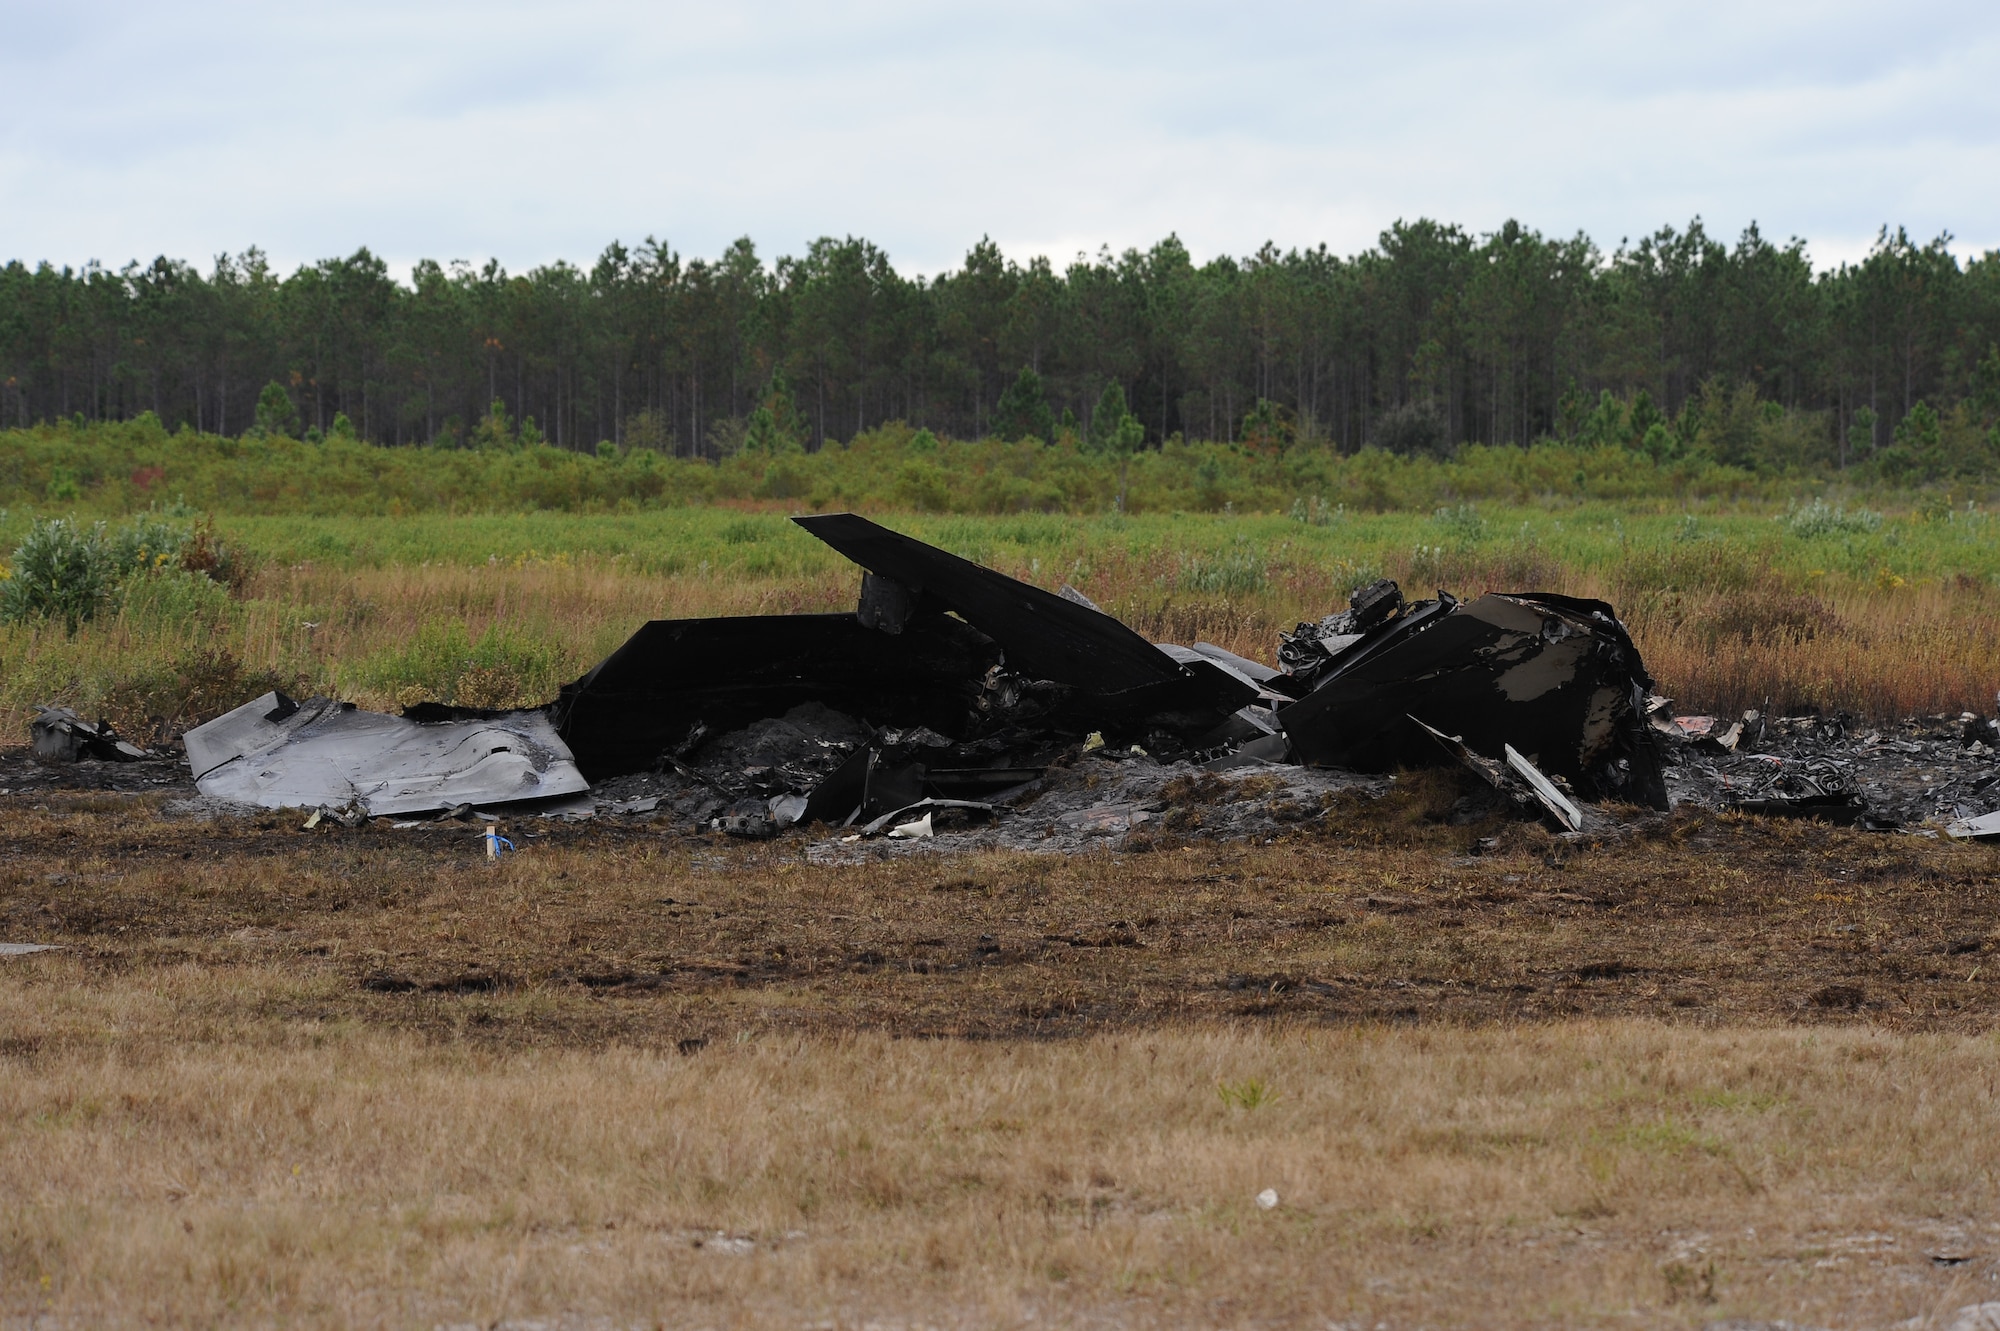 Shown is a photograph of the F-22 Raptor crash site from the incident Nov. 15 on Tyndall. 325th Fighter Wing officials are continuing to investigate and secure the scene. The pilot safely ejected from the aircraft and first responders were on the scene in less than two minutes. (U.S. Air Force photo by Lisa Norman)